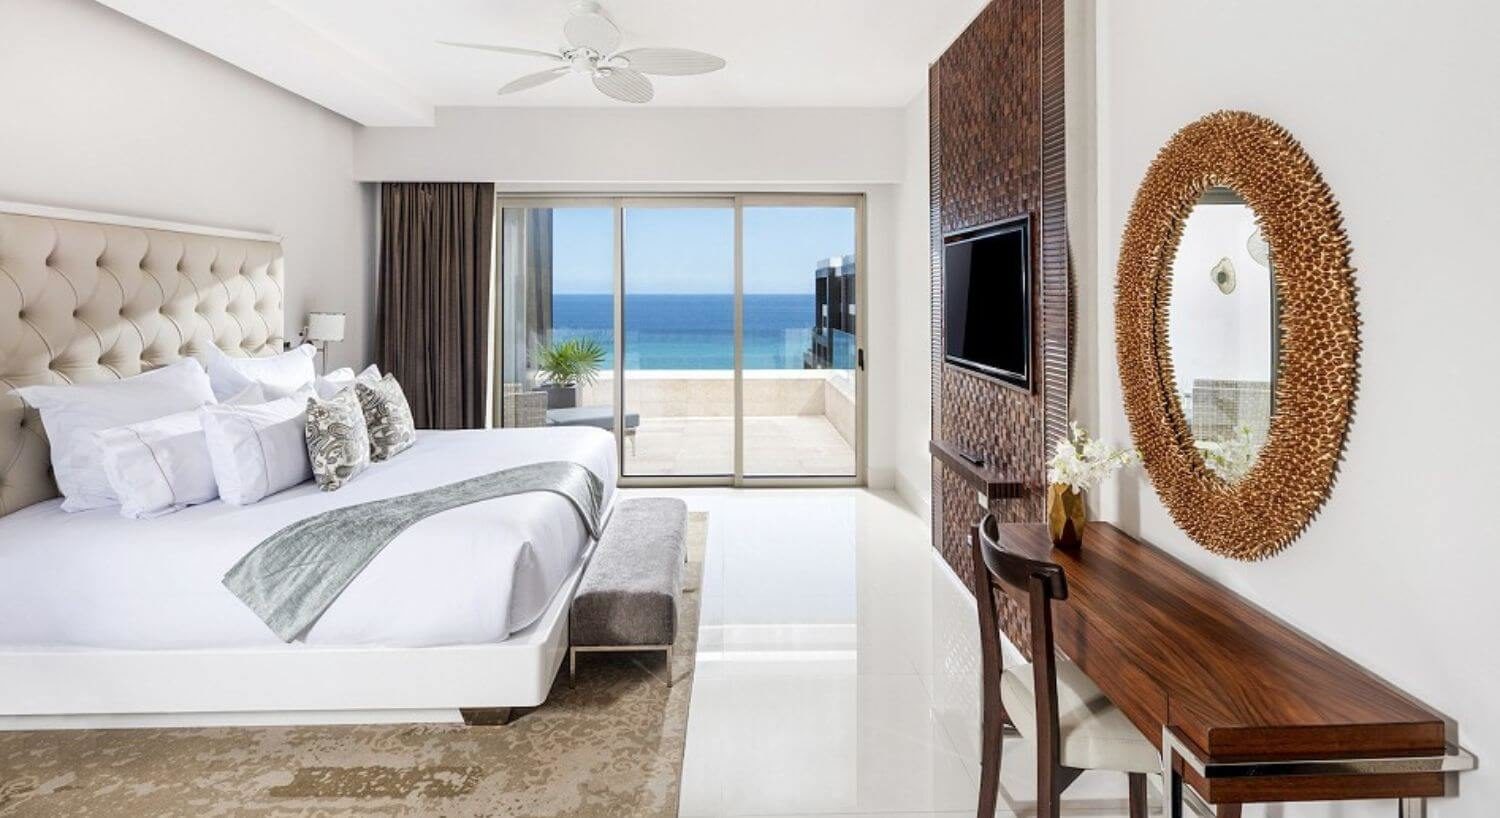 A bedroom with a King bed with plush headboard and a sitting bench at the foot of the bed, a flat screen TV and writing desk and chair on the opposite wall, and sliding glass doors that lead out to a private balcony with patio furniture and ocean views.